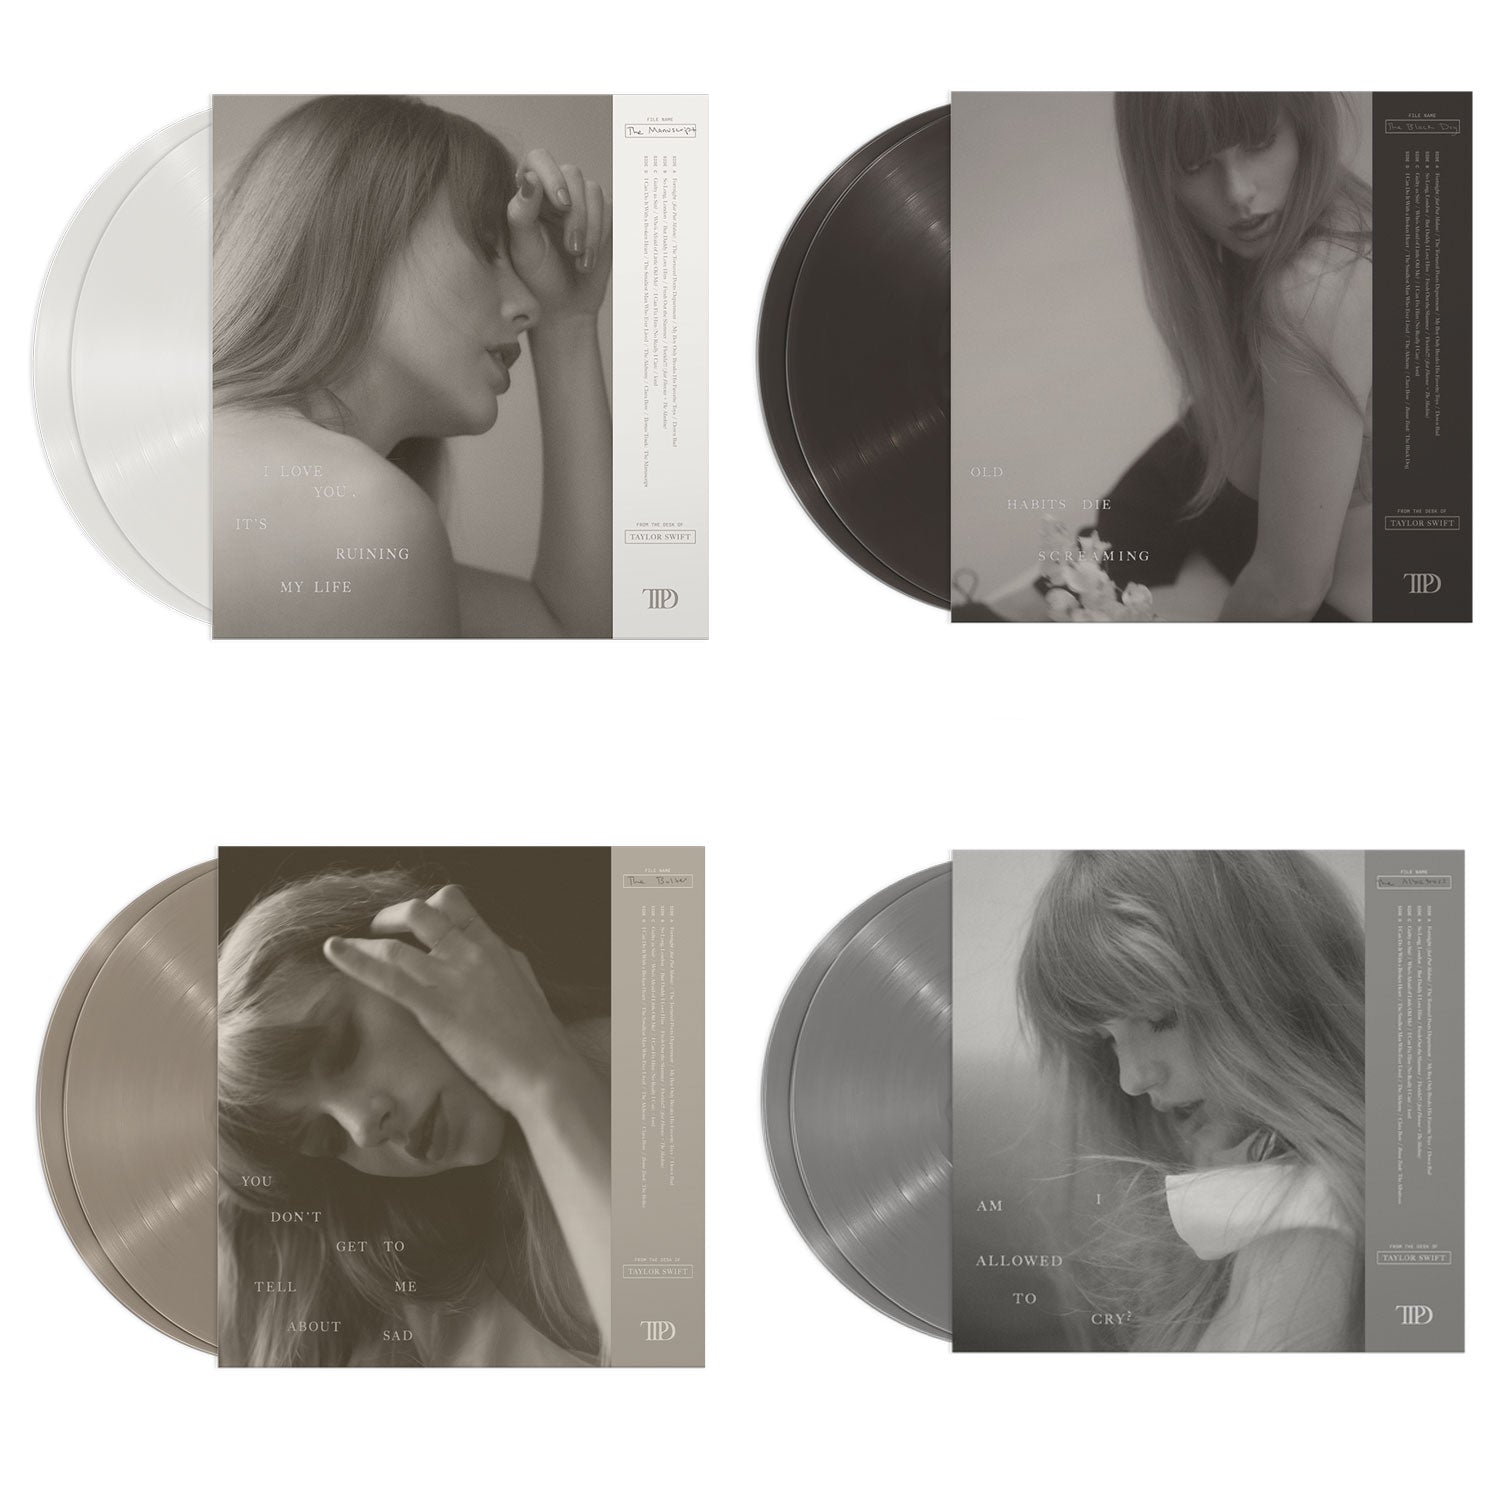 Taylor Swift: The Tortured Poets Department Vinyl LP Collection (All 4 Color Variants)